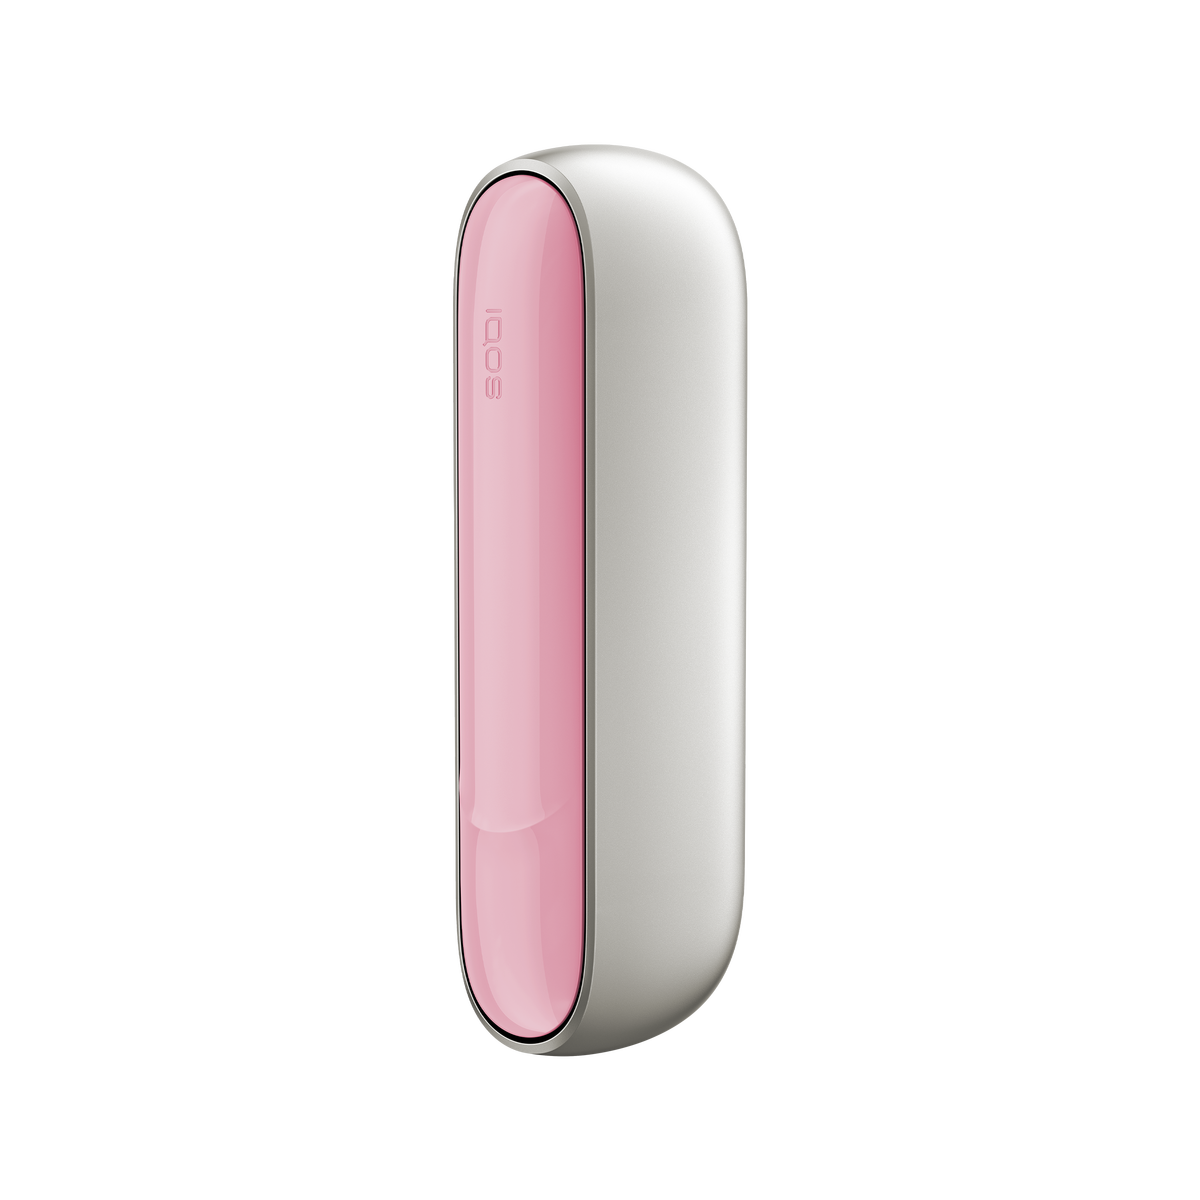 CR13418_H202631_PMI_CH_IQOS-DUO_02_charger_Cloud_Pink_2500x2500px.png